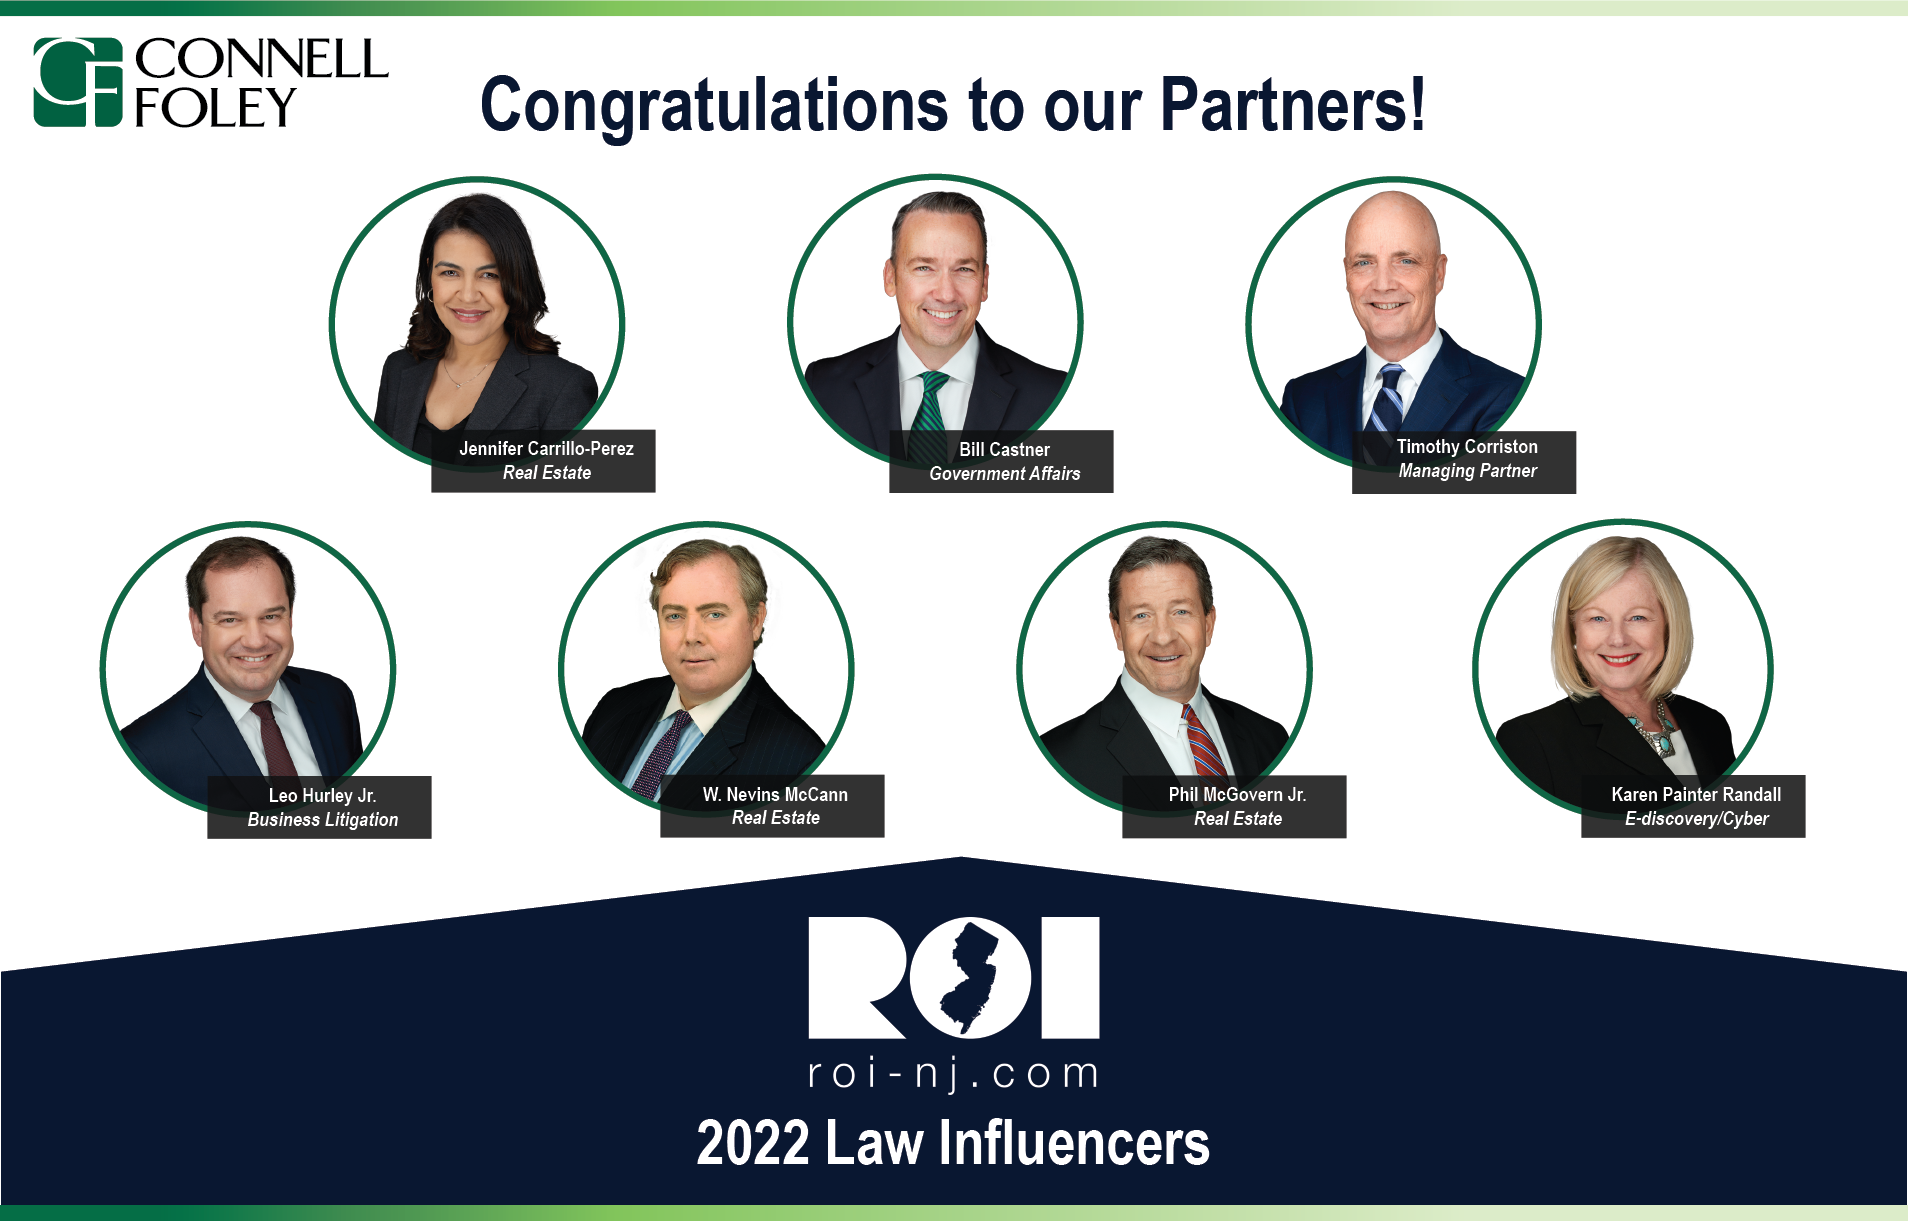 Connell Foley partners named to ROI-NJ 2022 Influencers - Law List